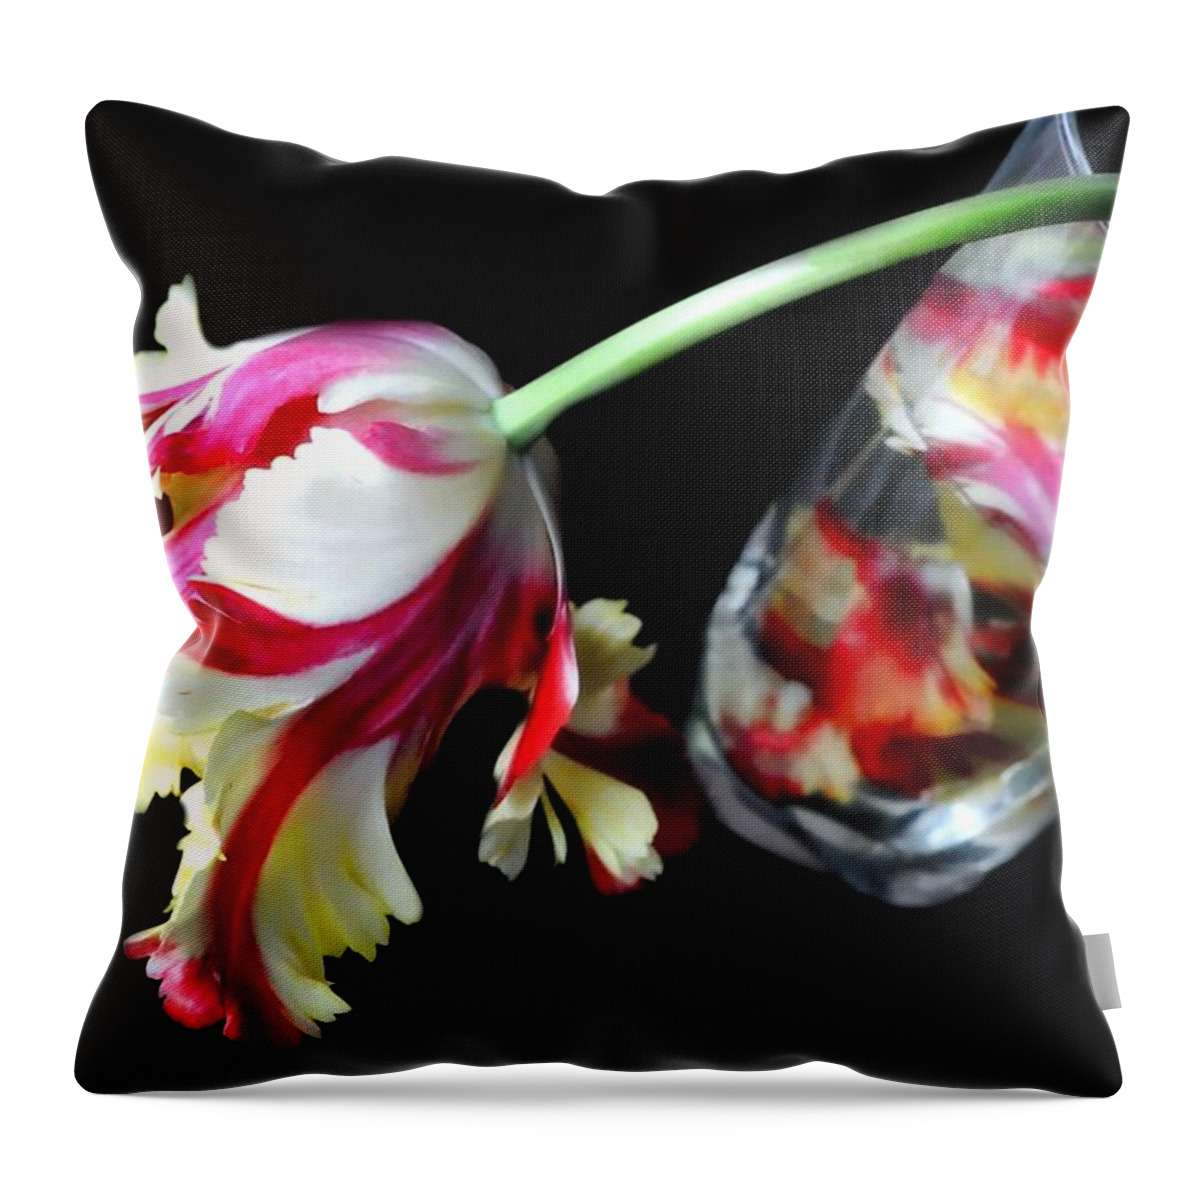 Black Background Throw Pillow featuring the photograph Tulip In Glass by Diana Lee Angstadt